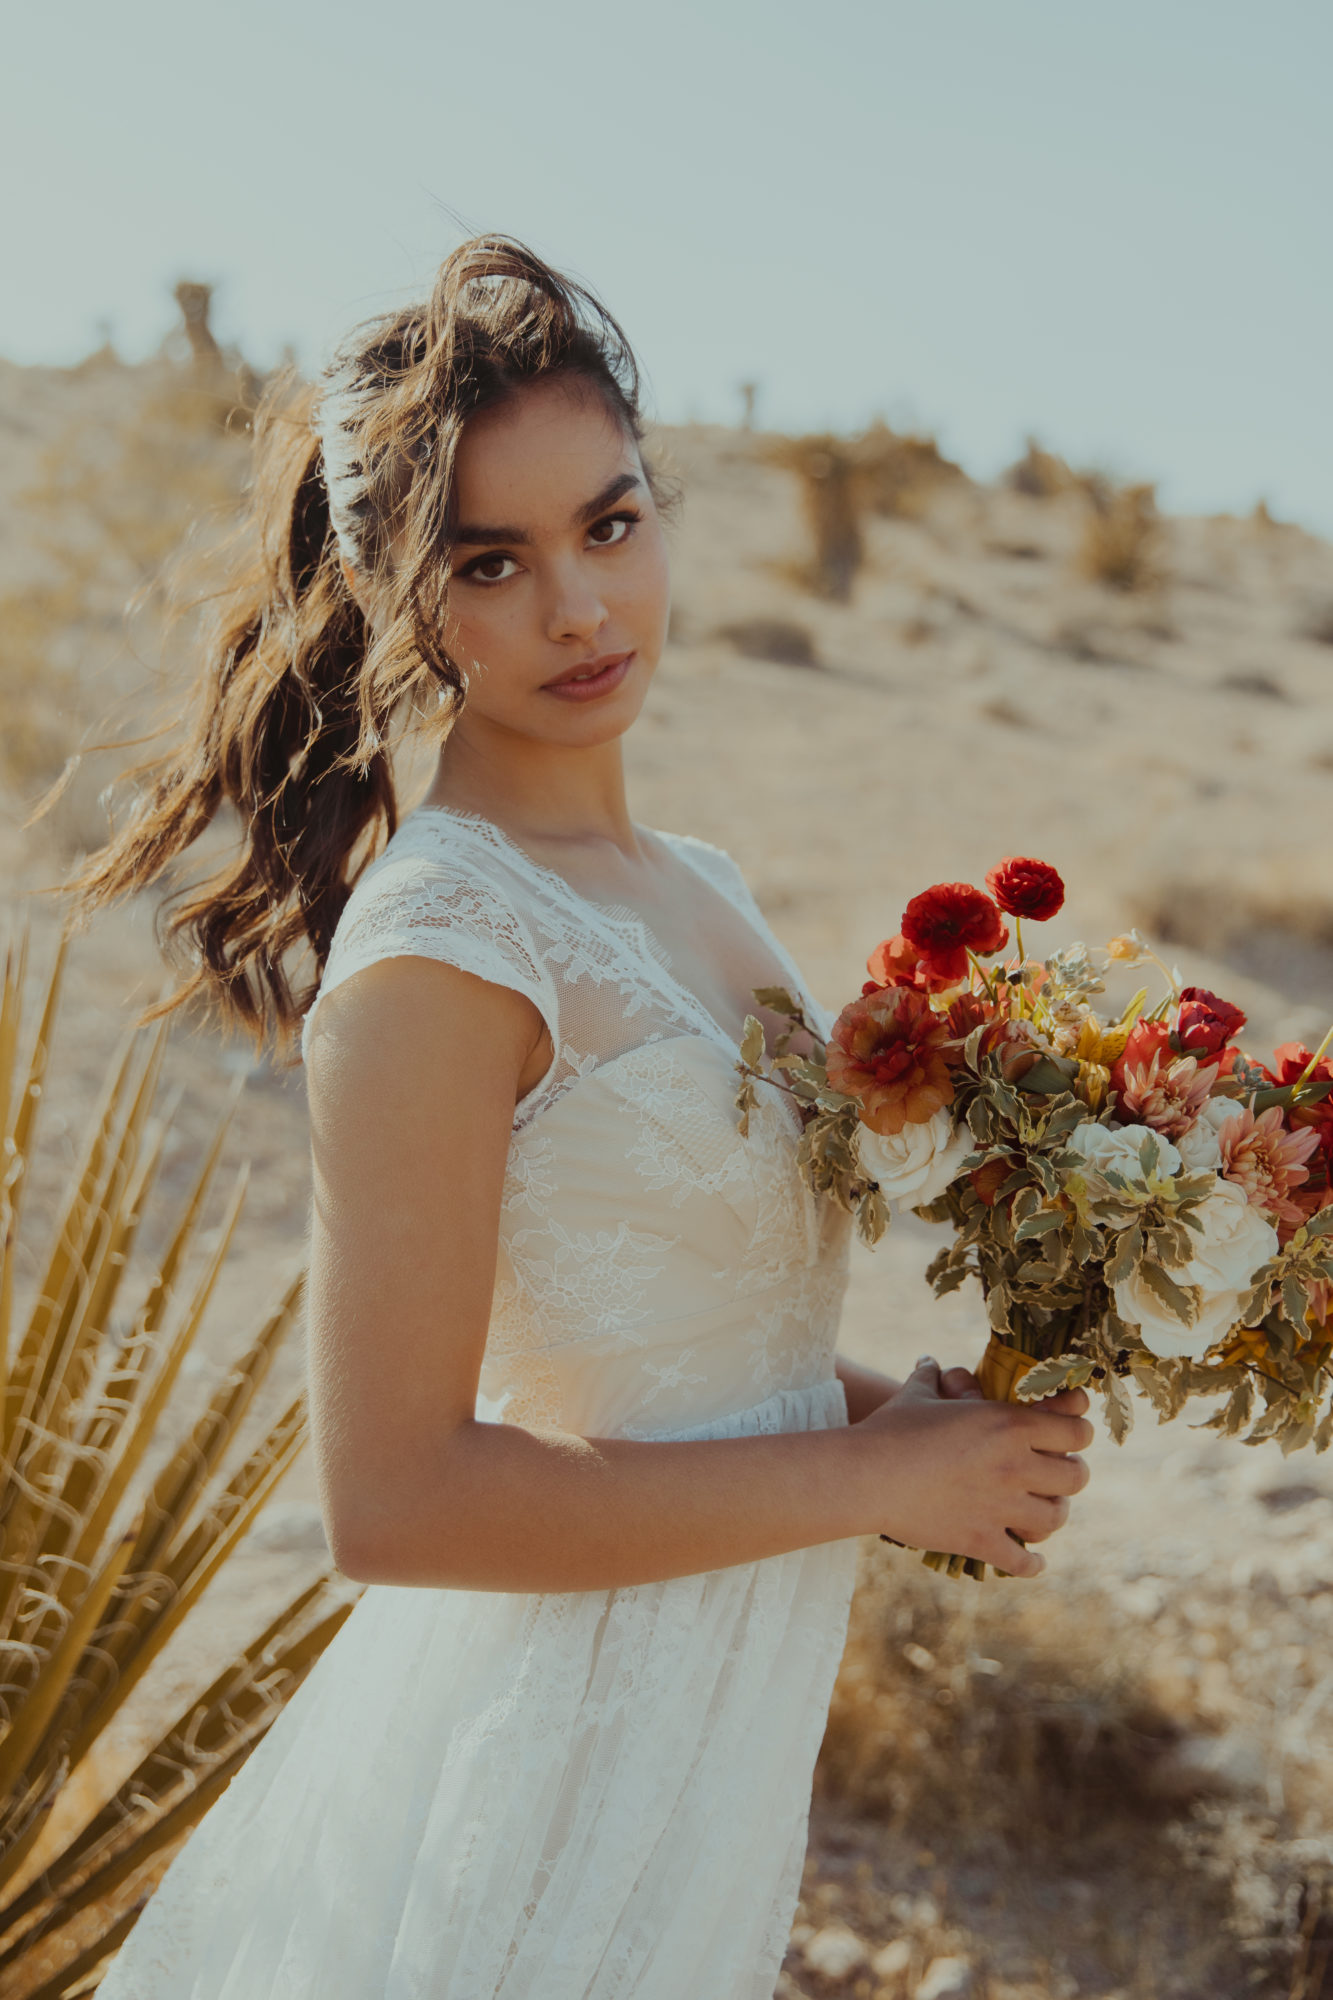 Portrait of the bride in the desert with her flowers